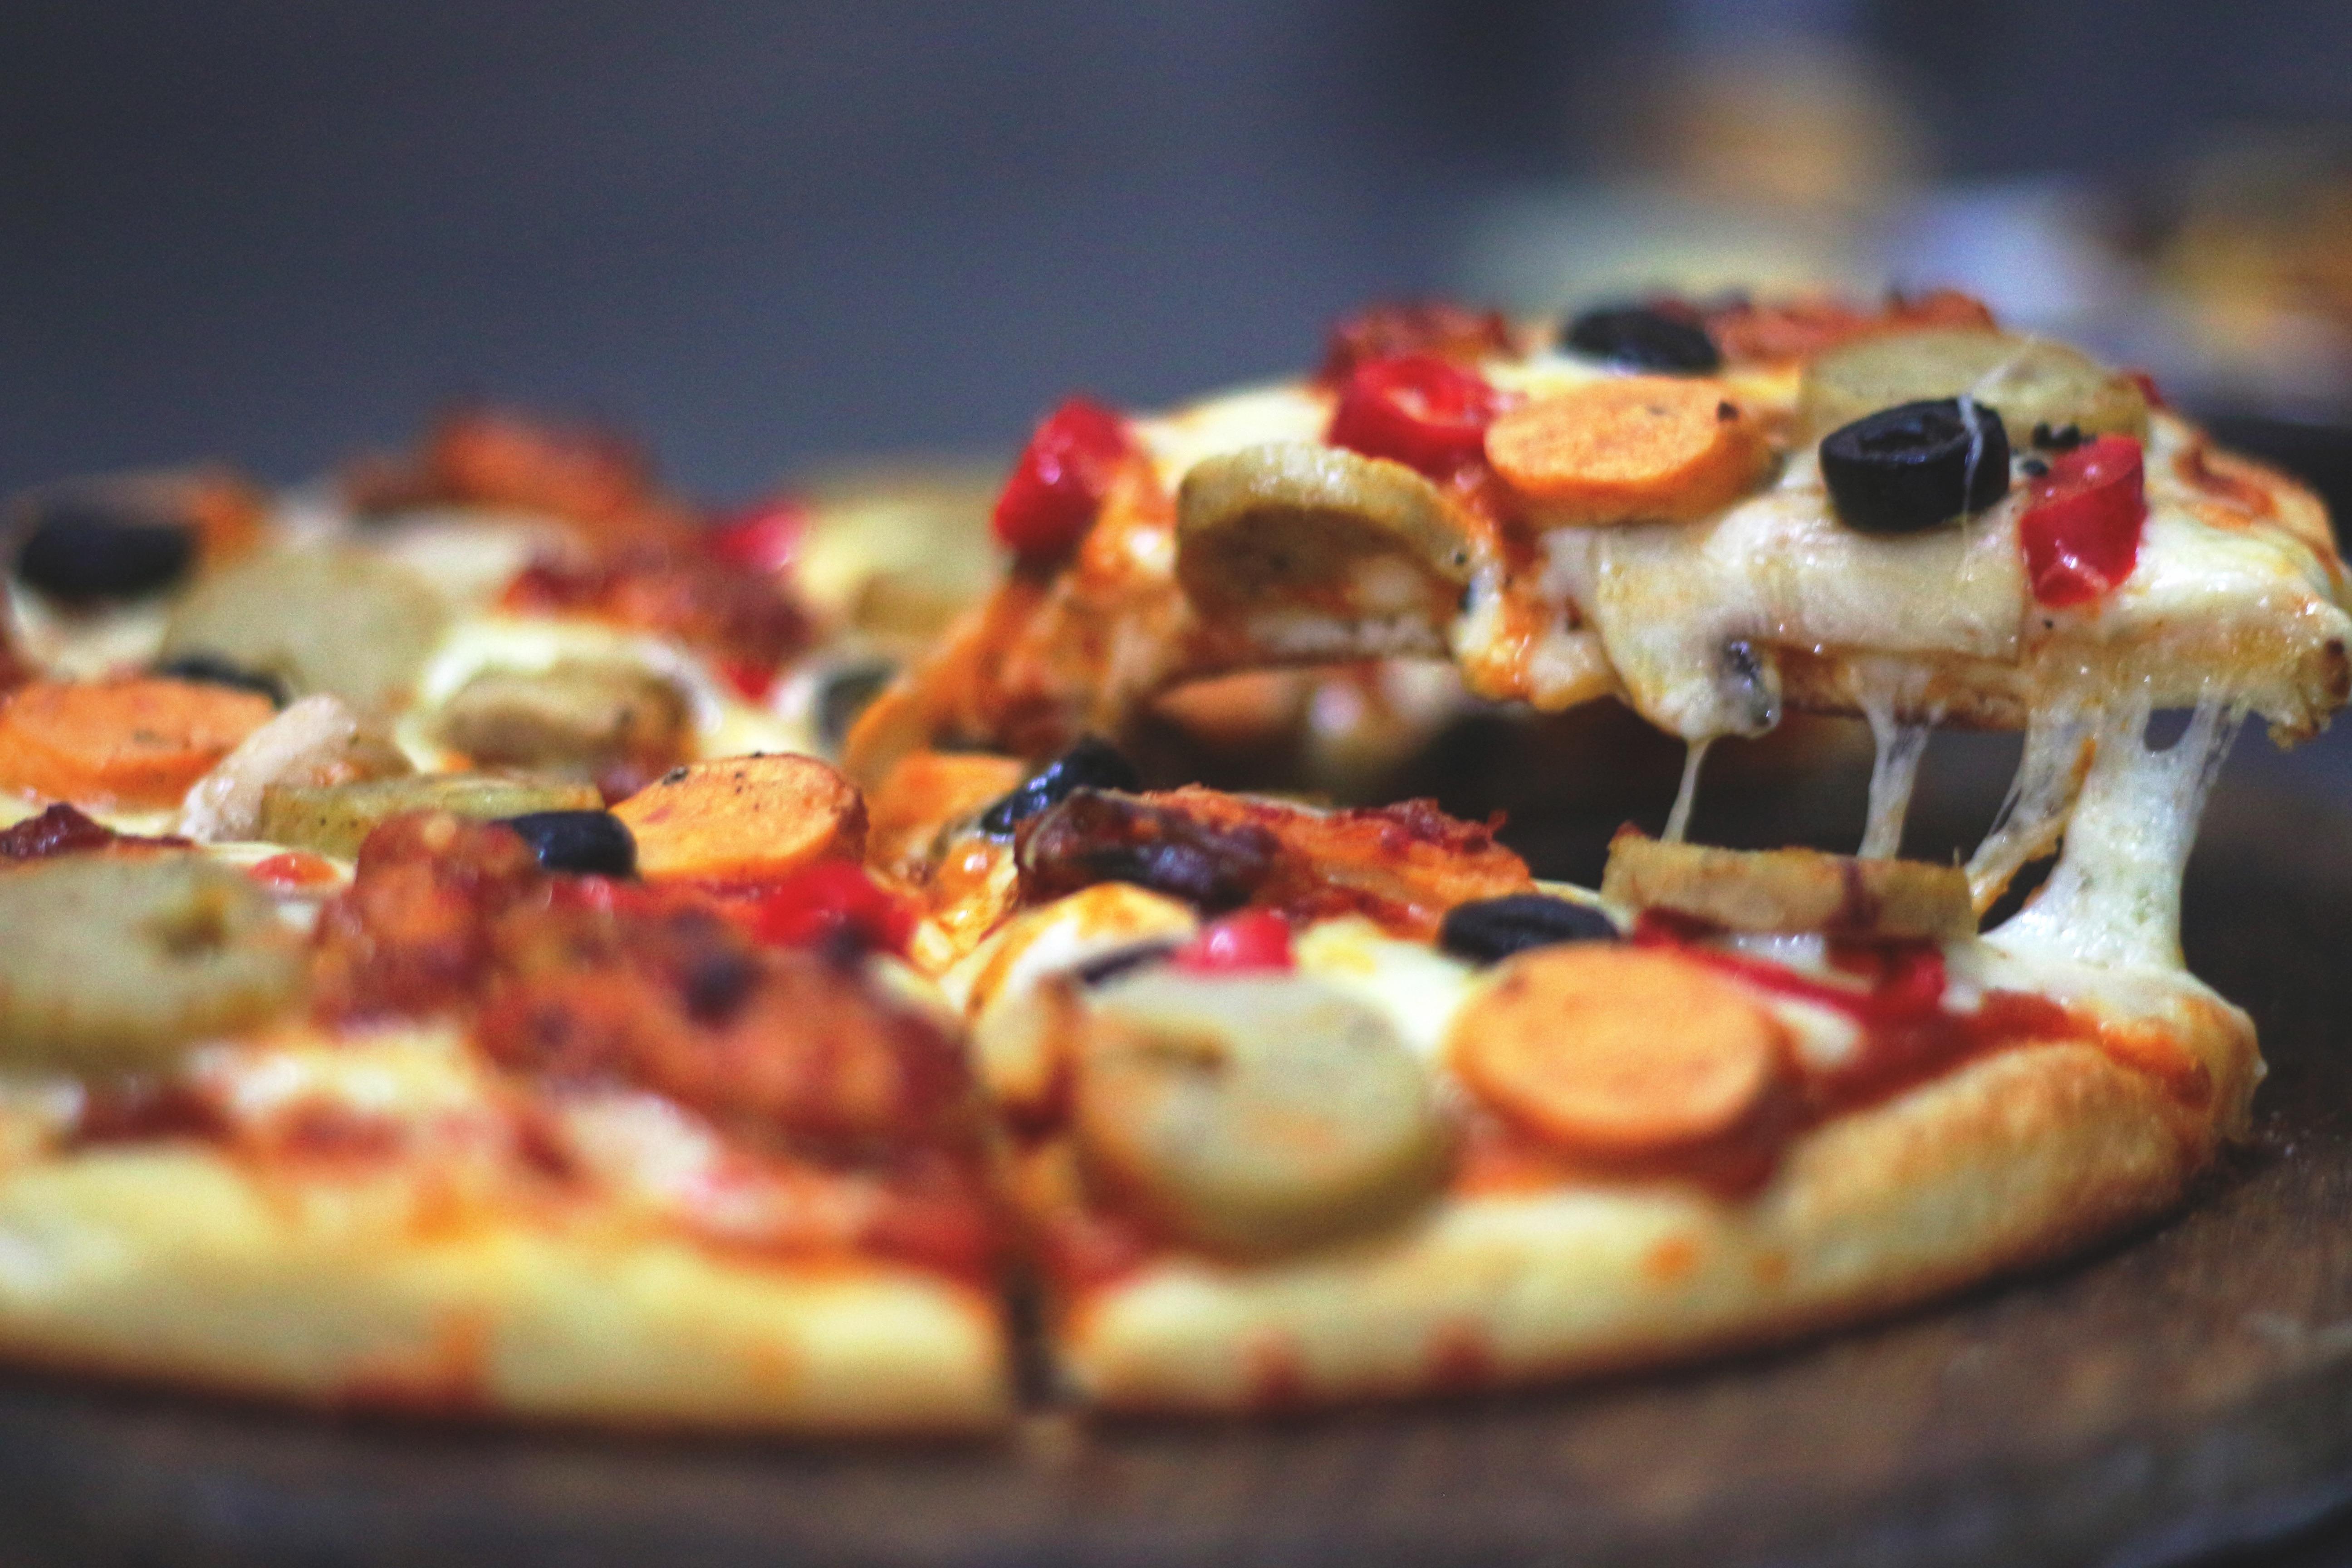 Pizza 4K wallpaper for your desktop or mobile screen free and easy to download